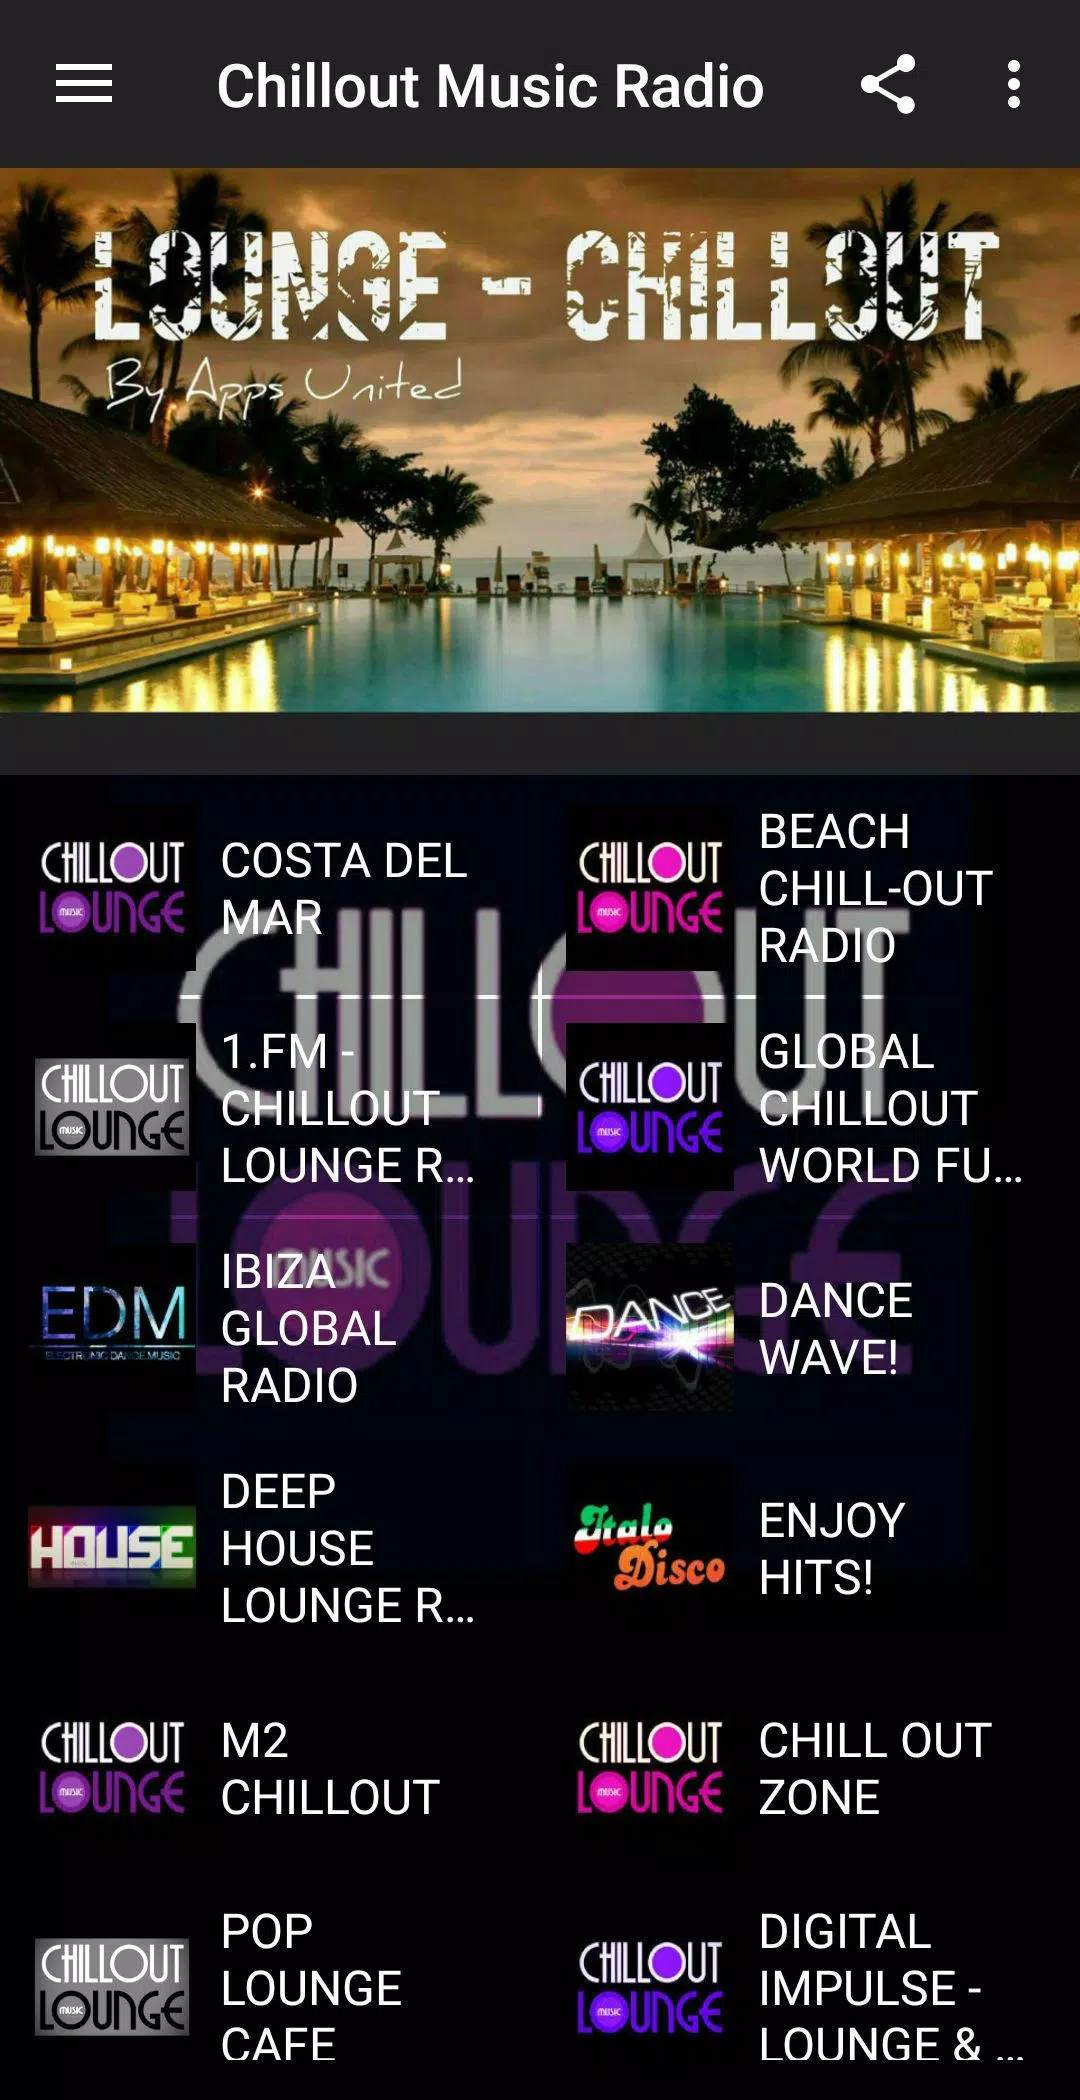 Chillout & Lounge music radio for Android - APK Download